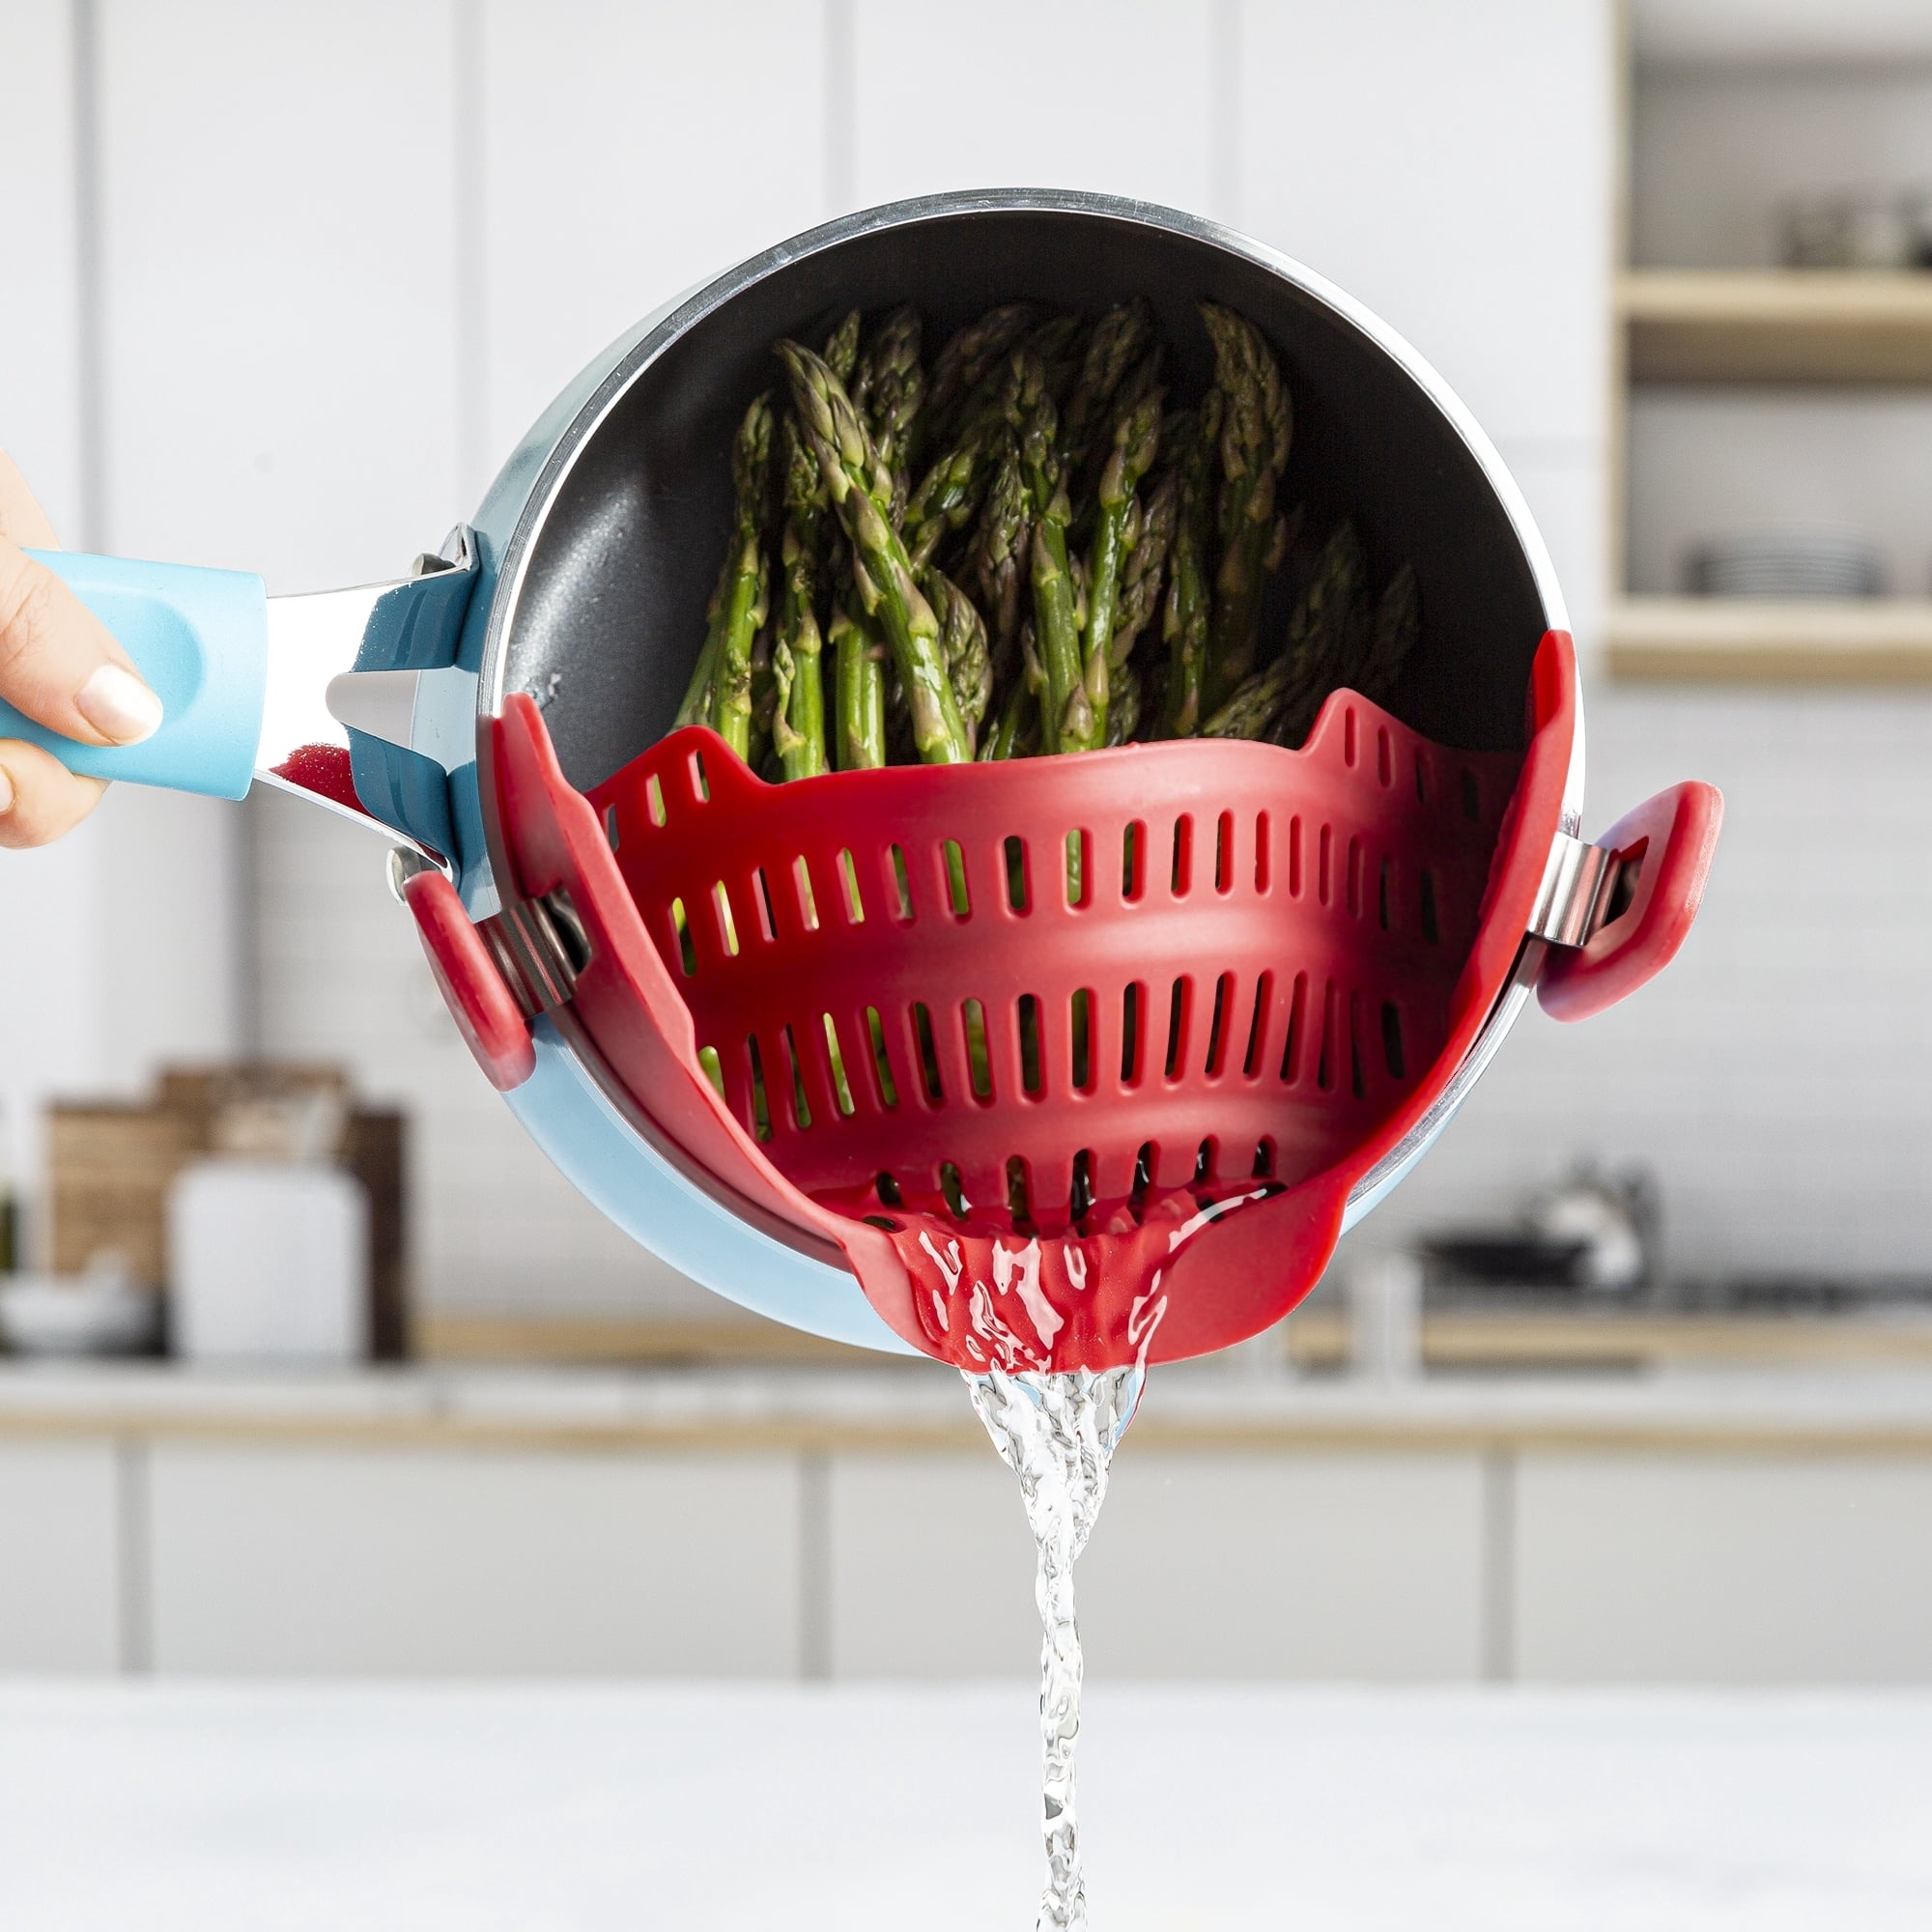 11 Tasty Products To Fill Your Kitchen With So You Can Actually Start Cooking In It